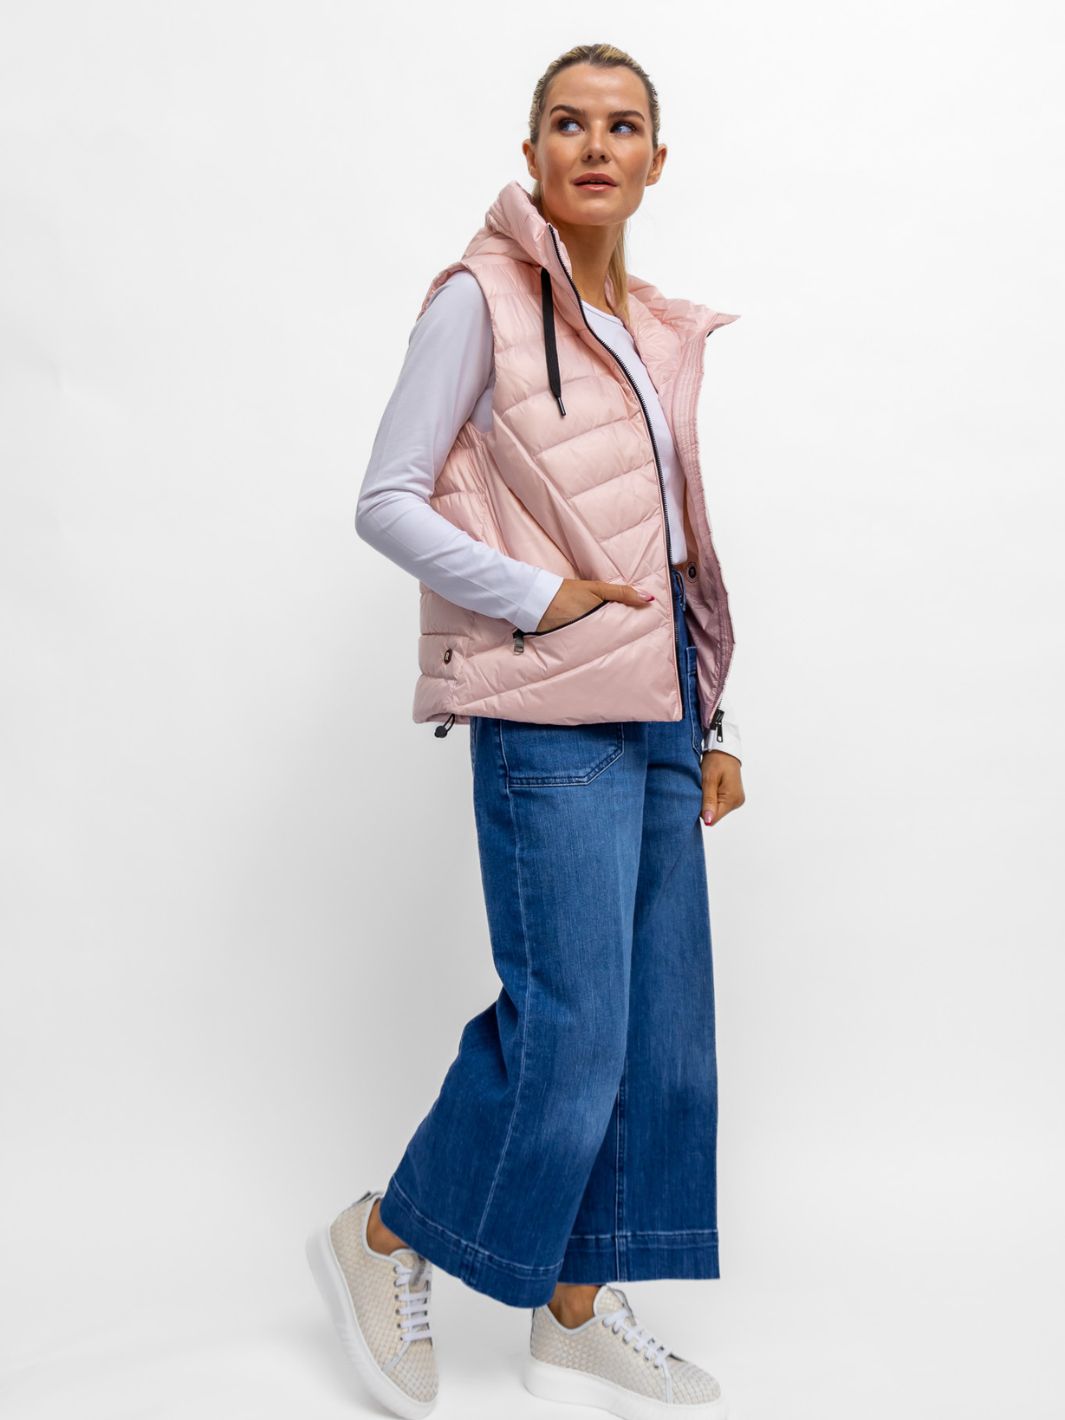 DIFFUSION.ie Reset Bordeaux Hooded Gilet in Macaron Pink